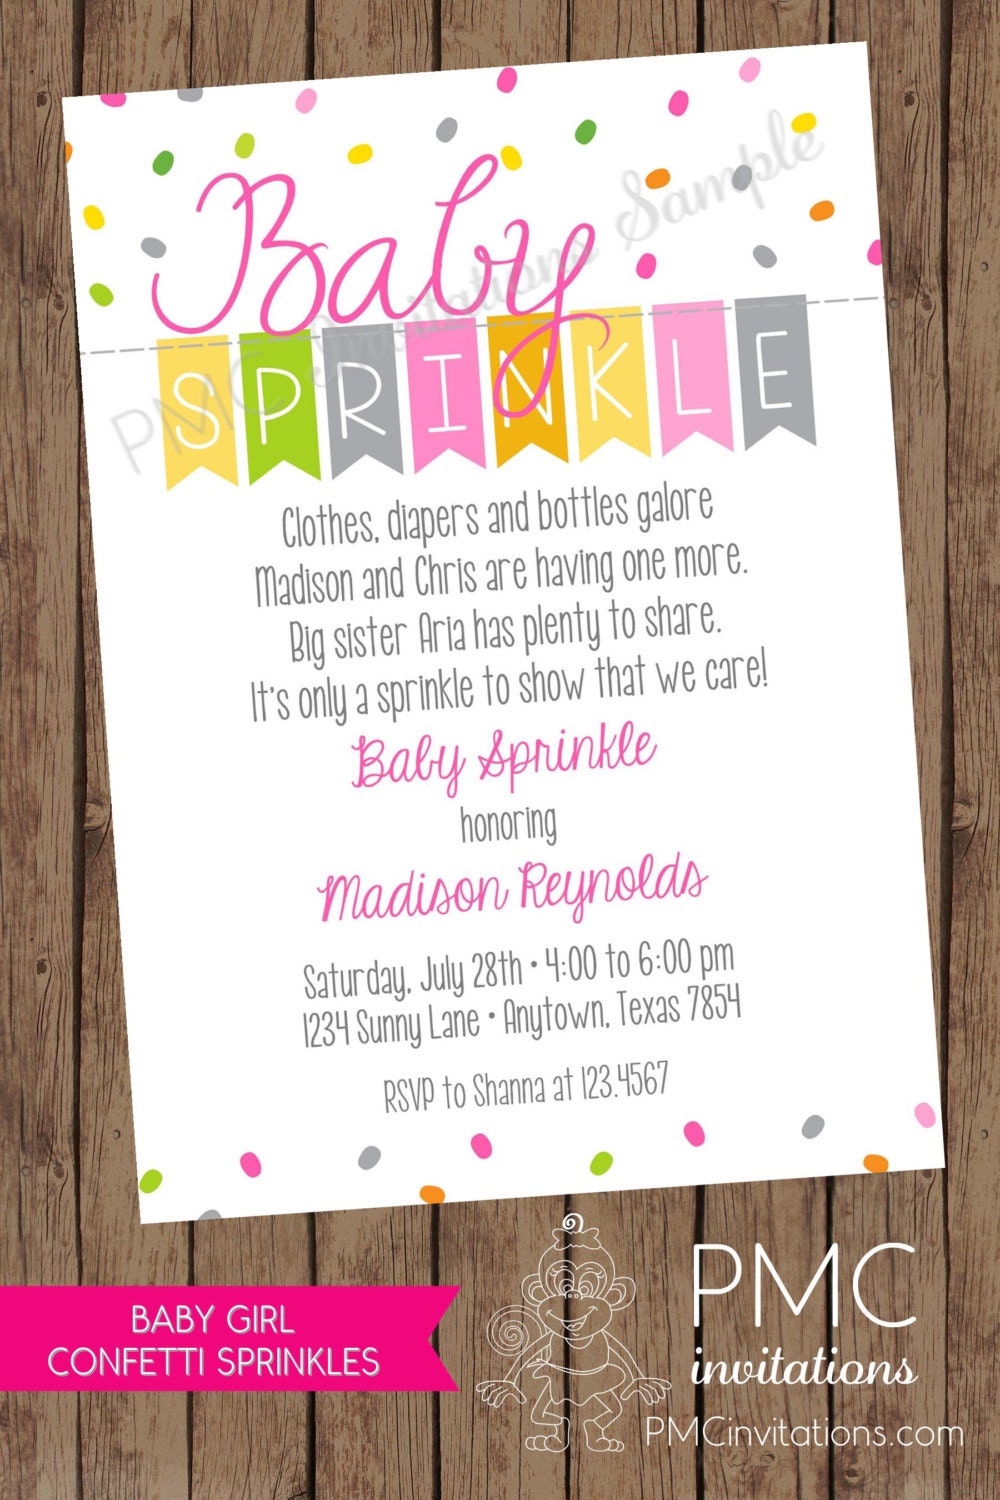 baby-sprinkle-invitations-1-00-each-with-envelope